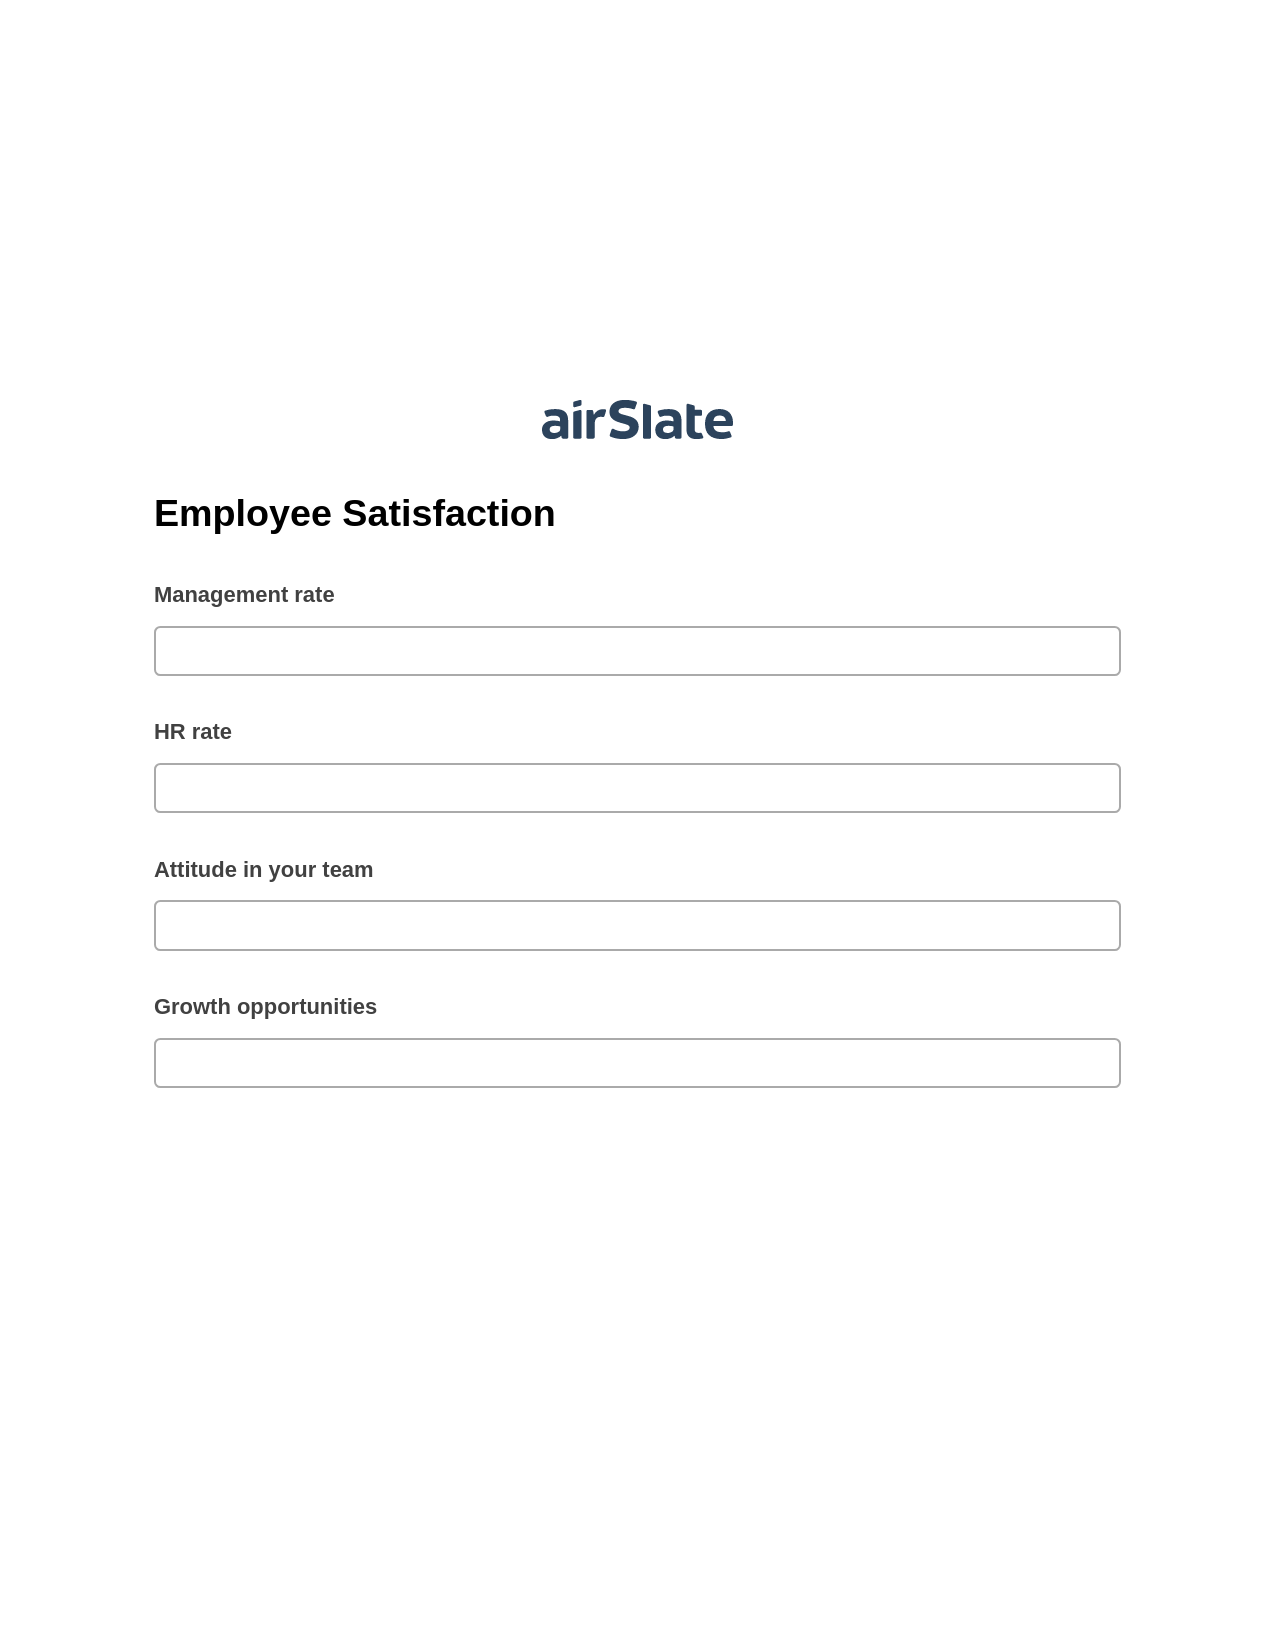 Multirole Employee Satisfaction Pre-fill from CSV File Bot, Create slate from another Flow Bot, Export to Excel 365 Bot